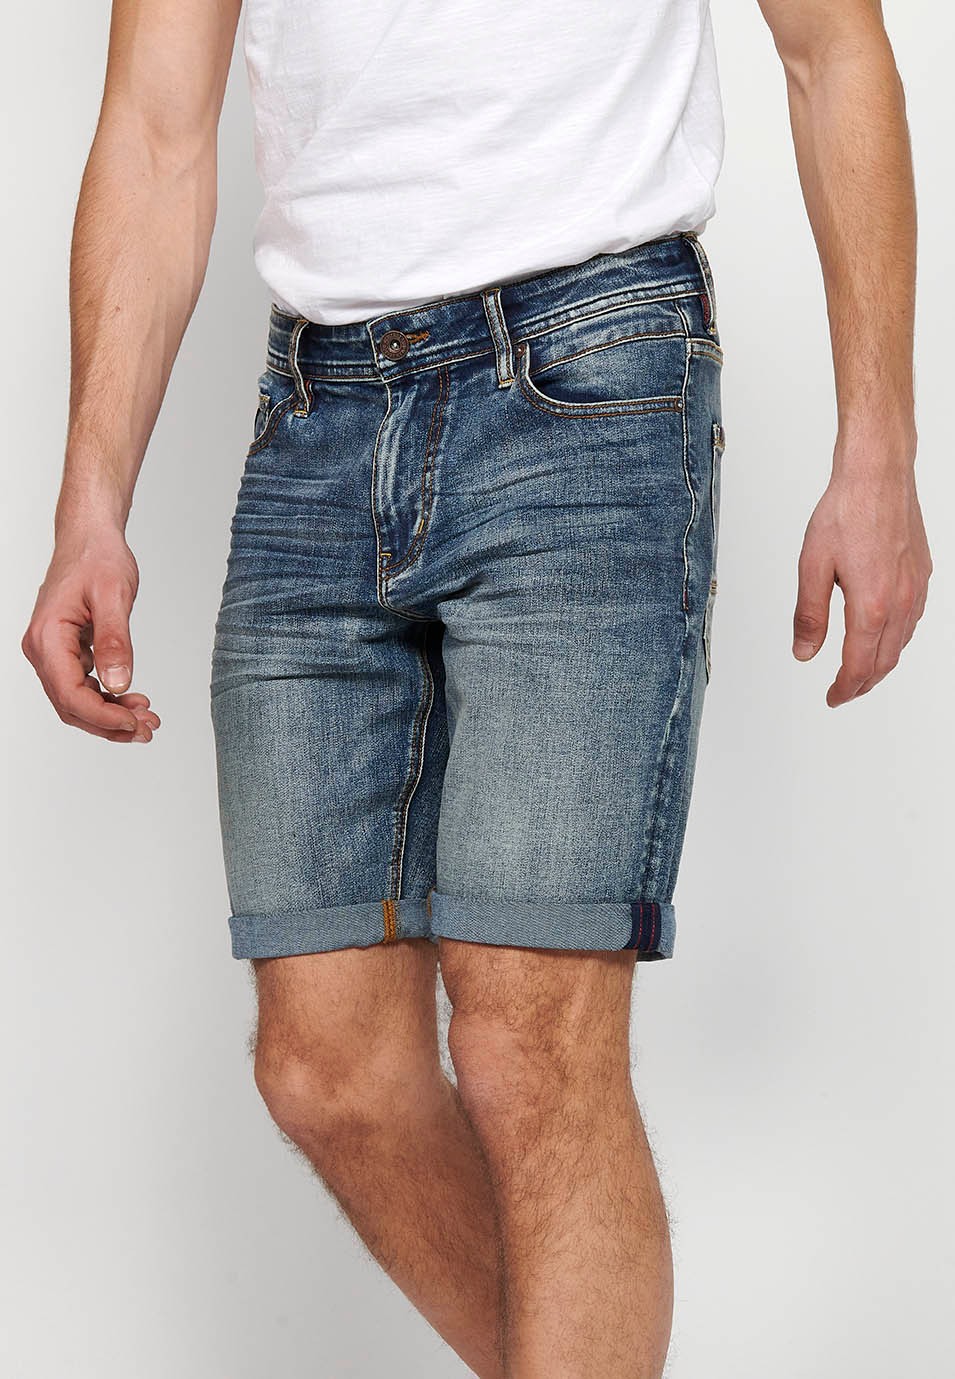 Denim Bermuda Shorts with Front Closure with Zipper and Button with Five Pockets, One Pocket Pocket, Blue Color for Men 1